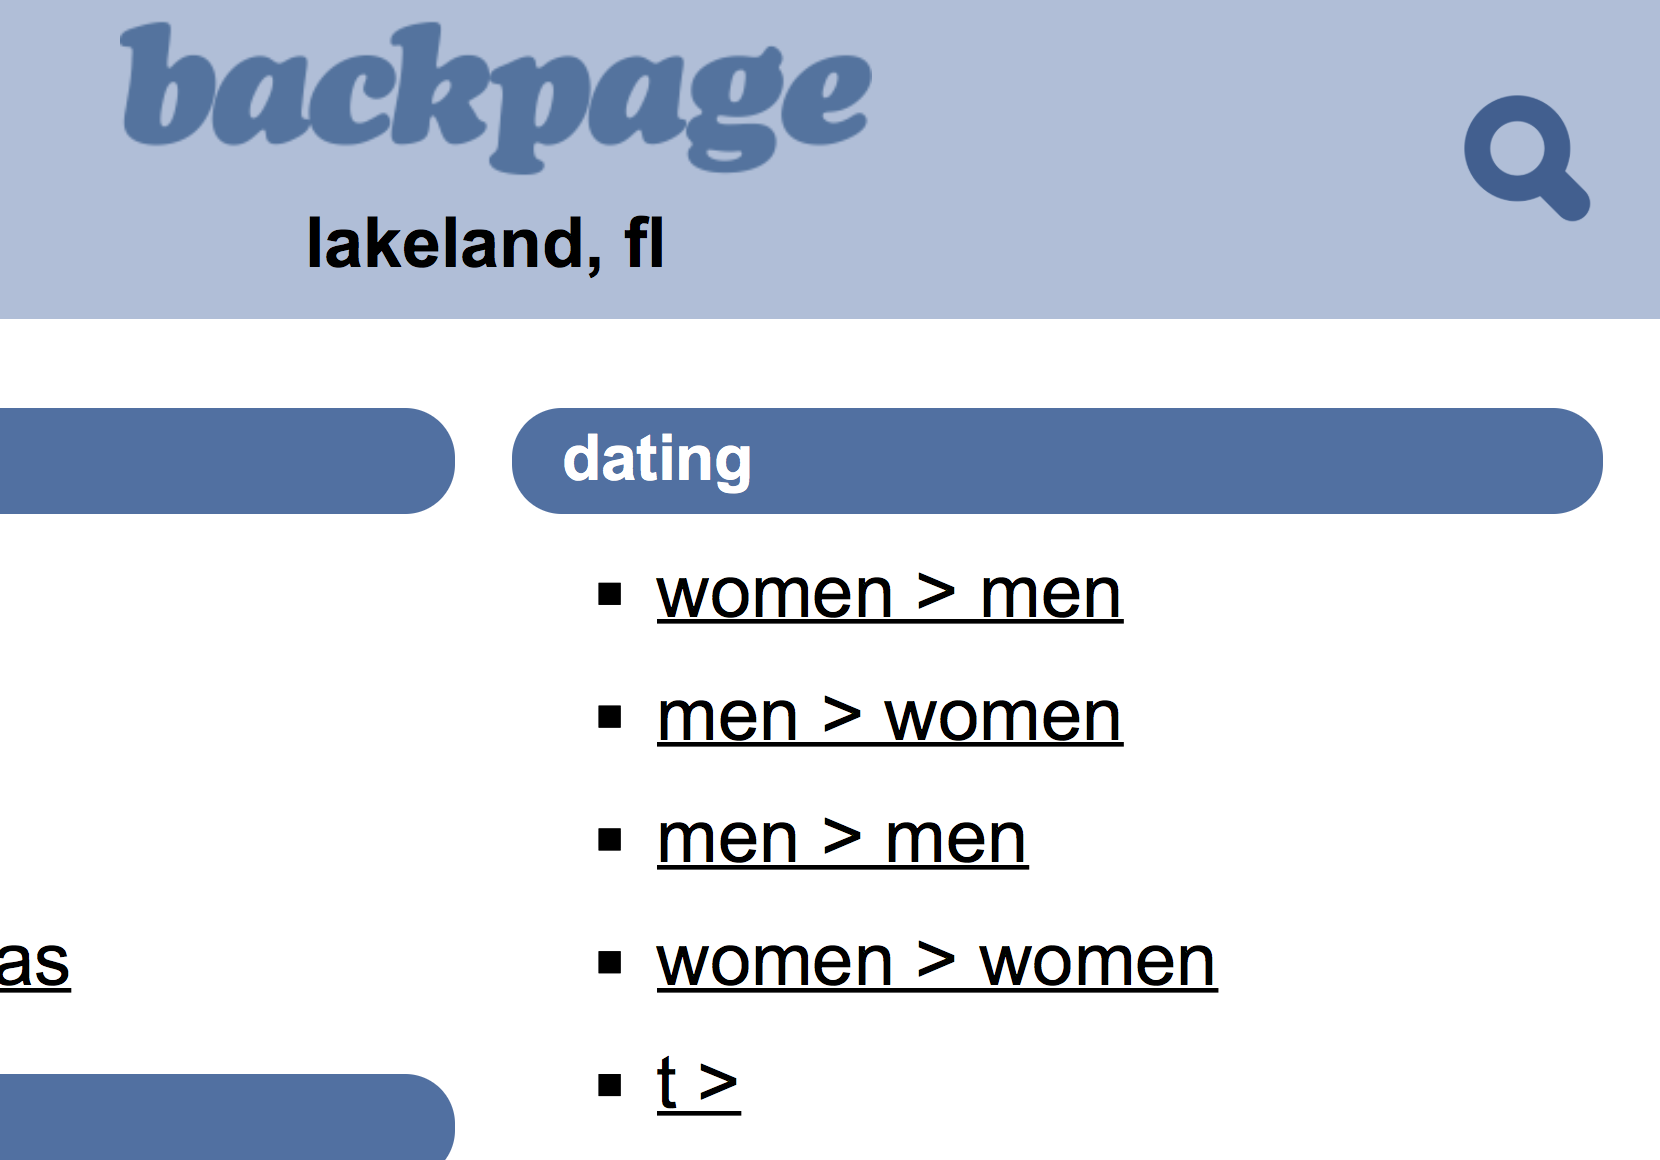 aidan chin recommends transgender dates in orlando backpage pic